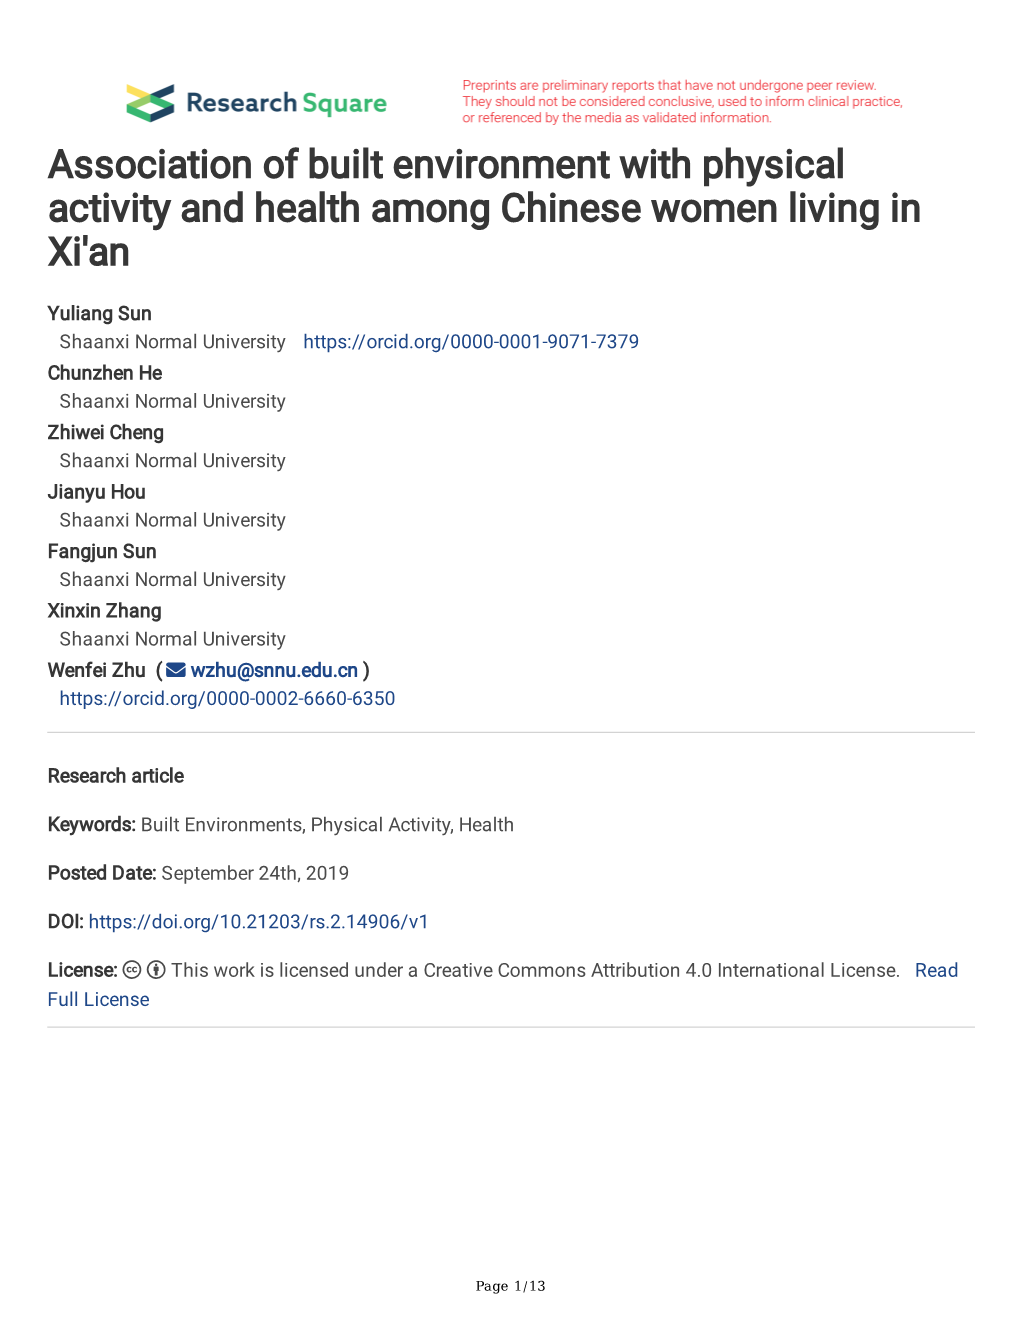 Association of Built Environment with Physical Activity and Health Among Chinese Women Living in Xi'an